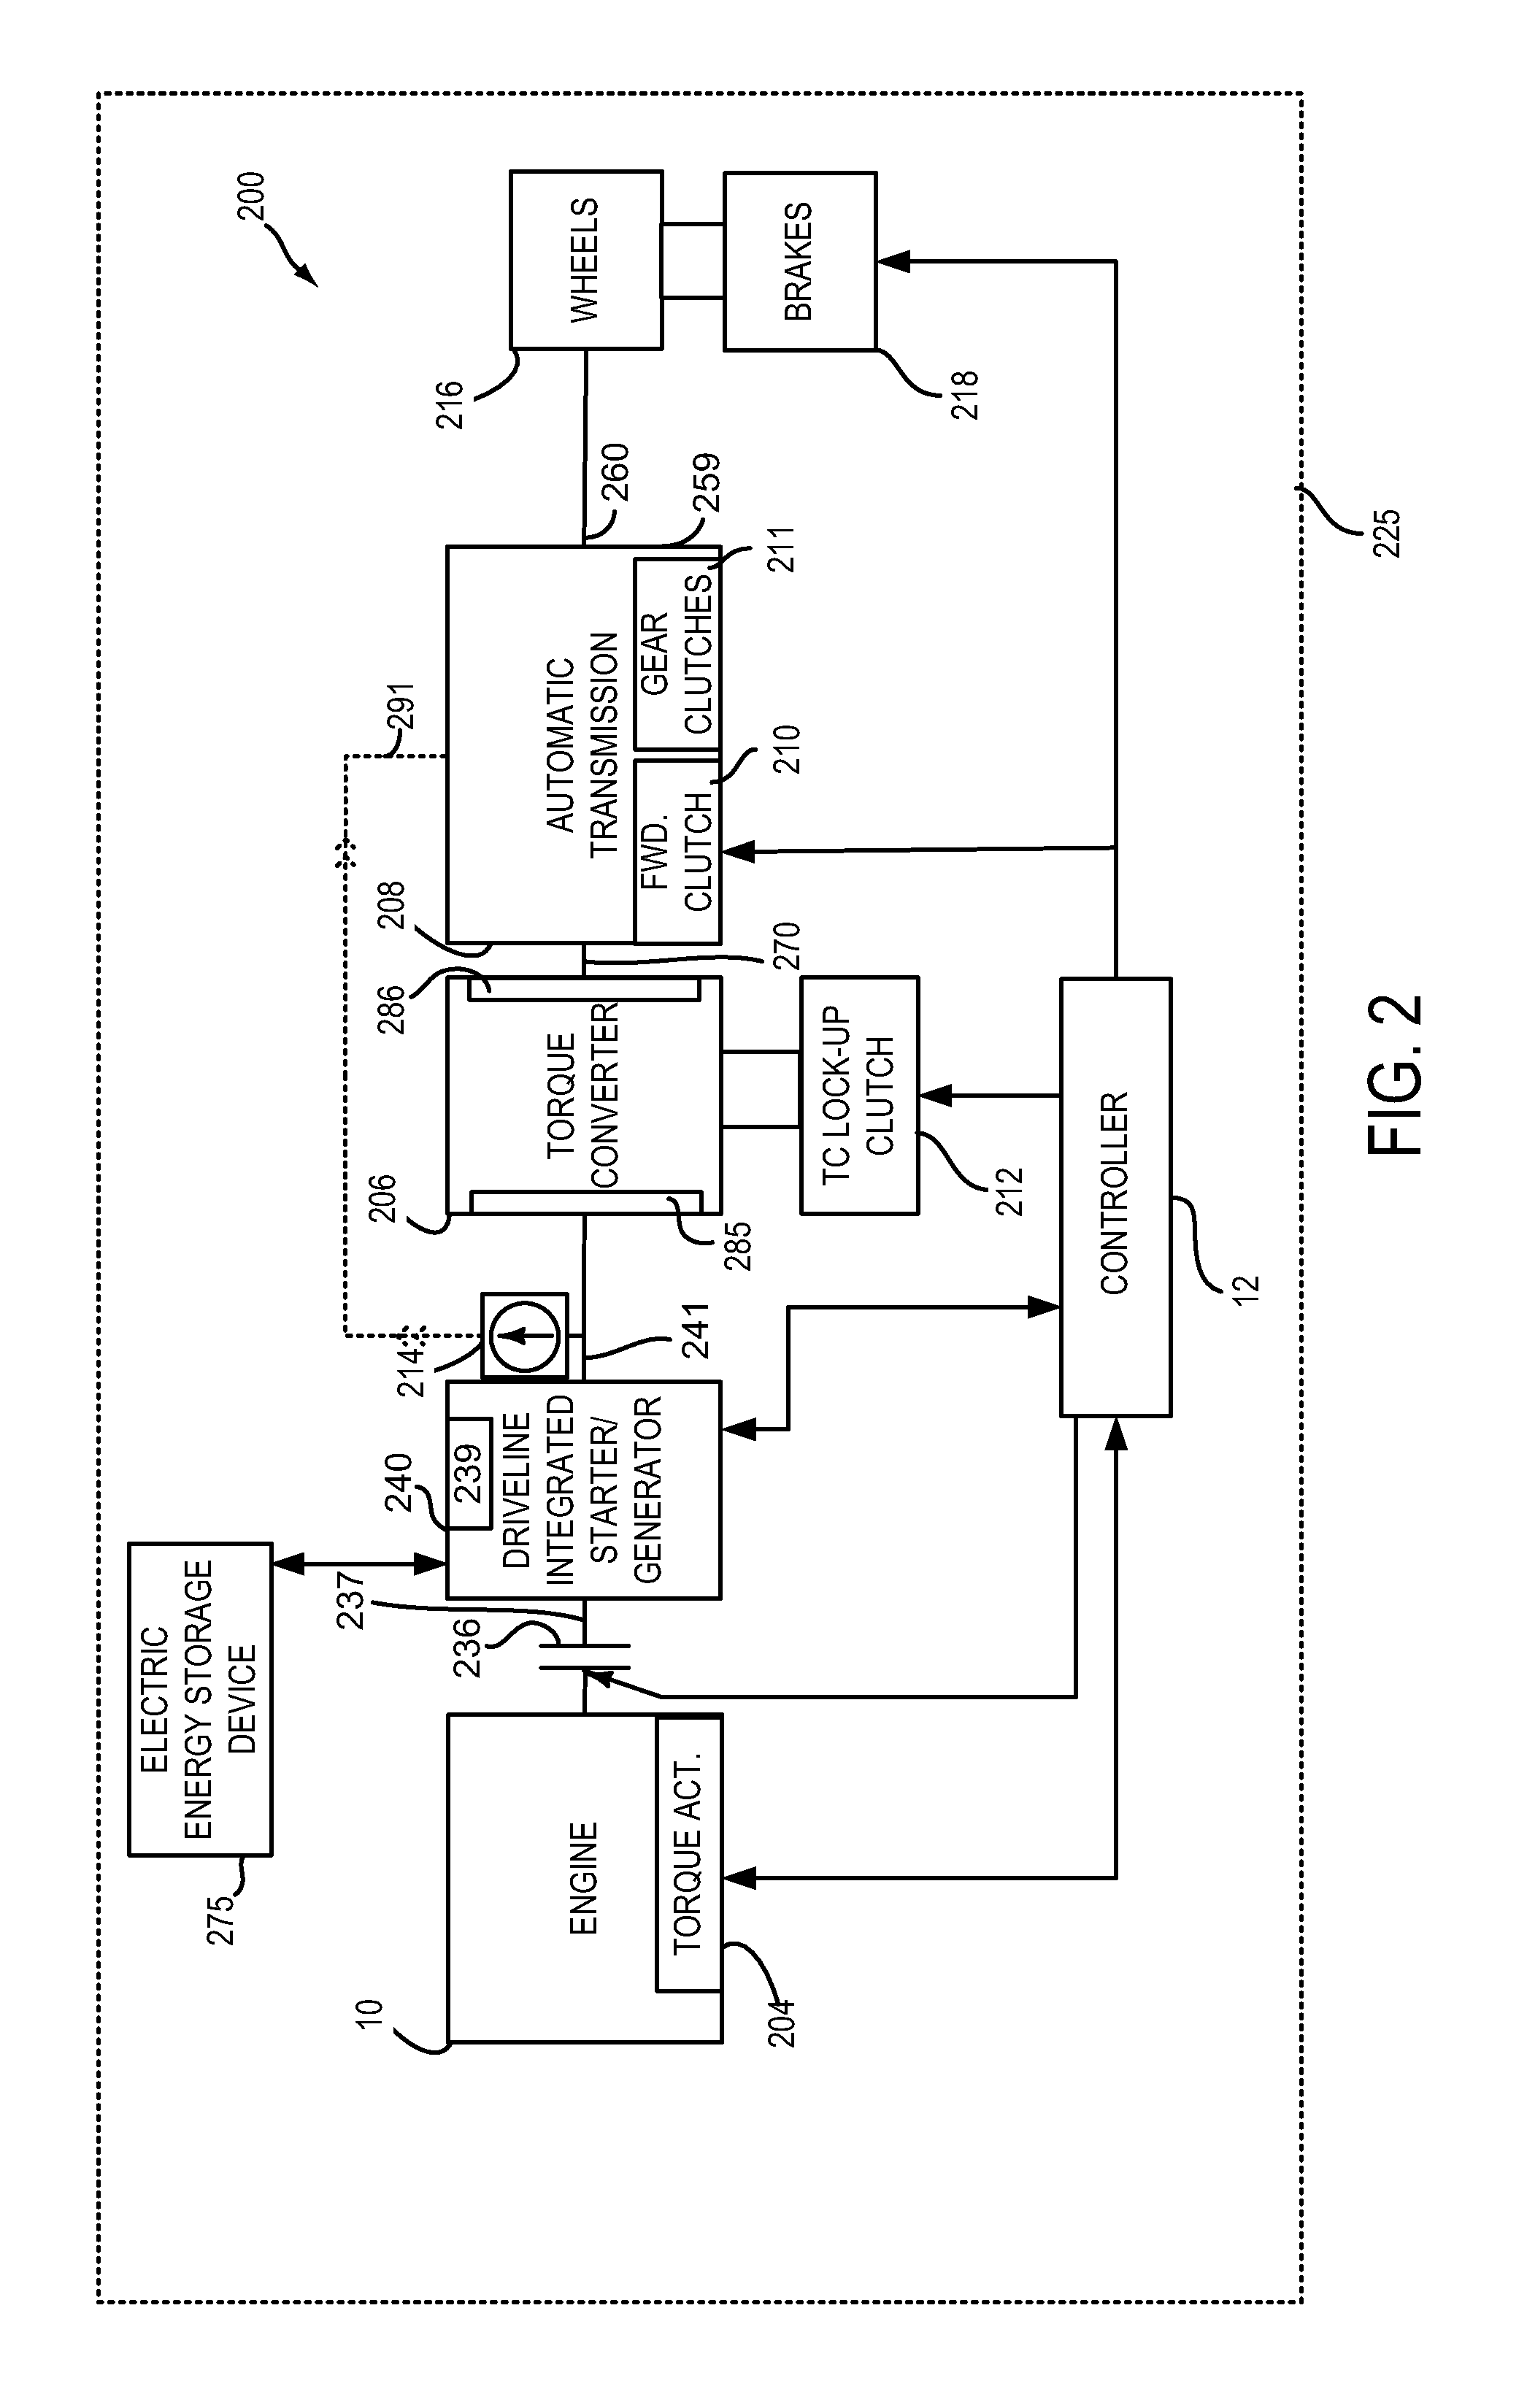 Methods and systems for improving hybrid vehicle gear shifting